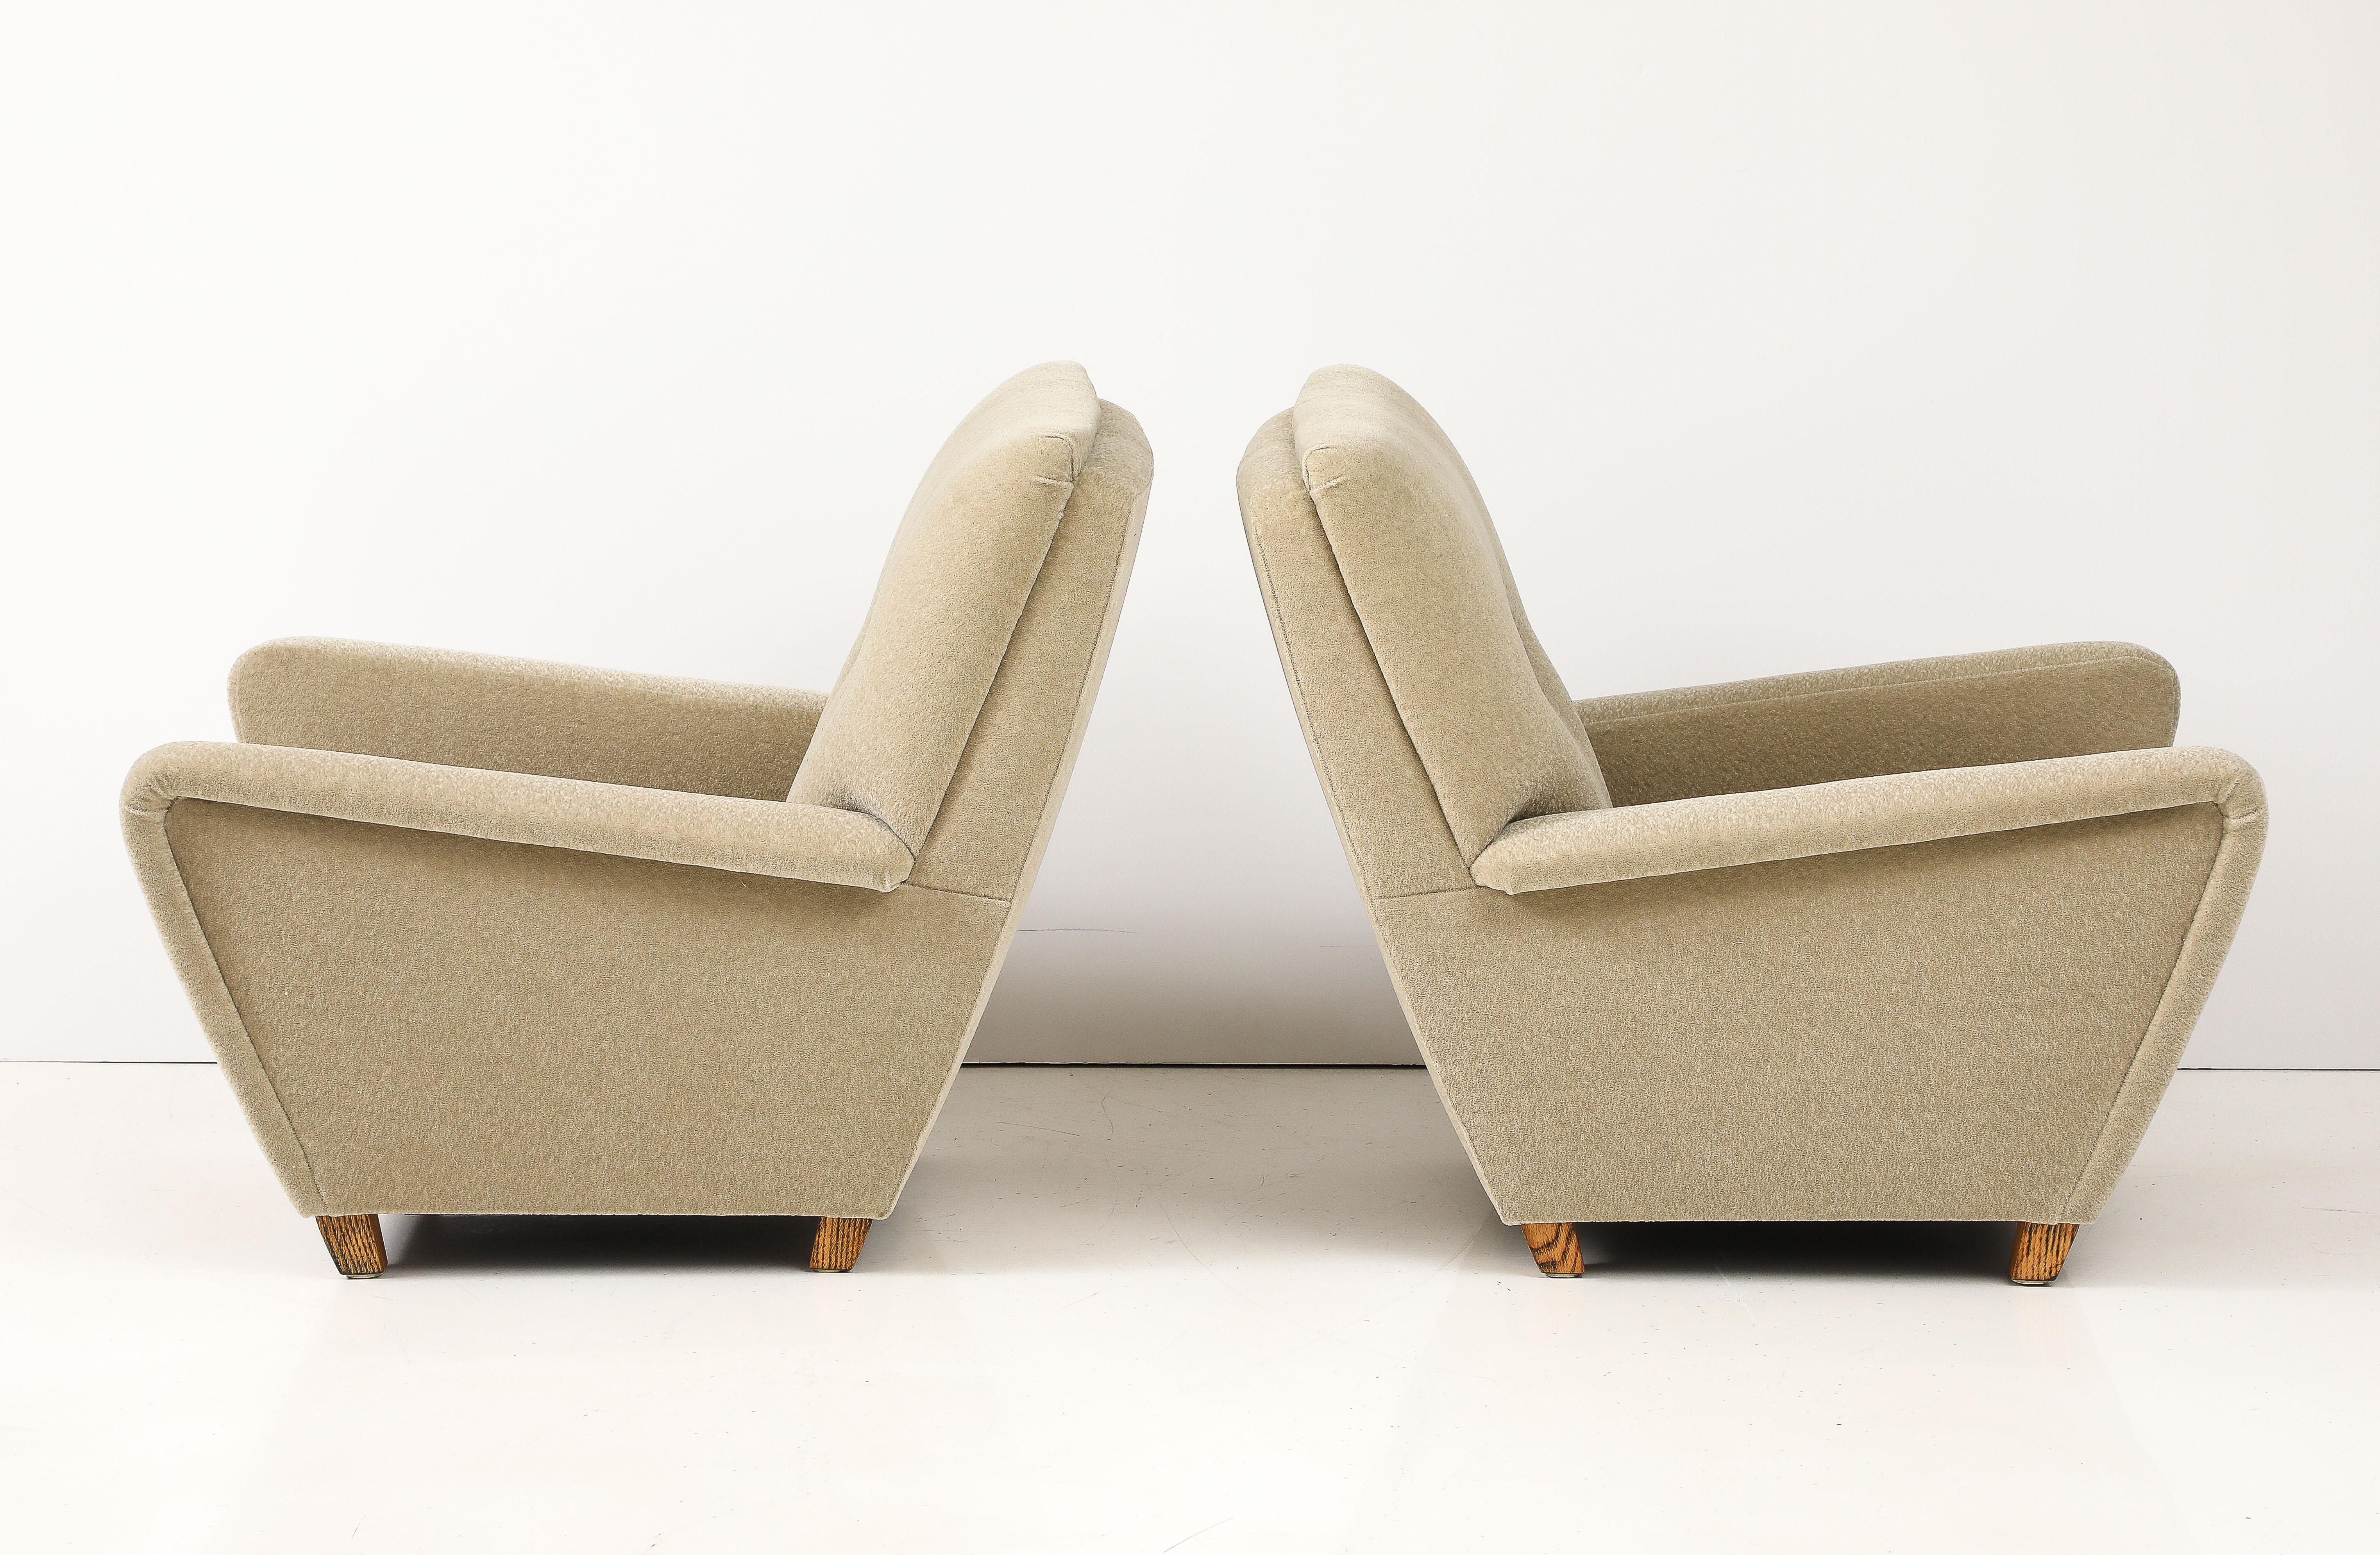 Amazing pair of 1950's French Lounge chairs, the chairs have been reupholstered in Donghia Mohair fabric, the chairs are well made and very heavy.